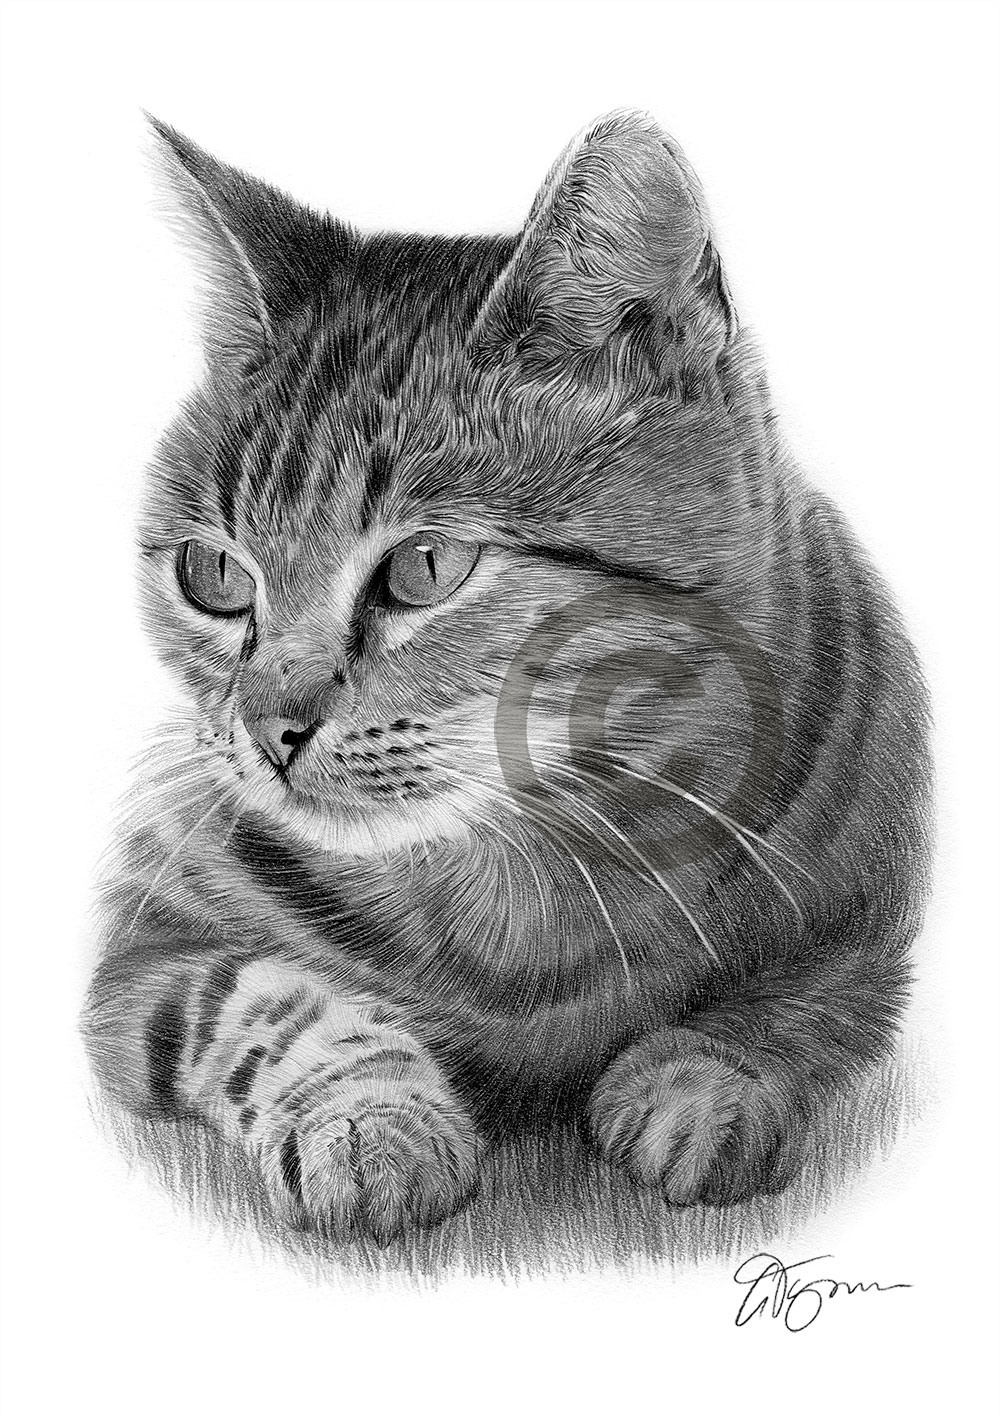 Pencil drawing of a cat by UK artist Gary Tymon